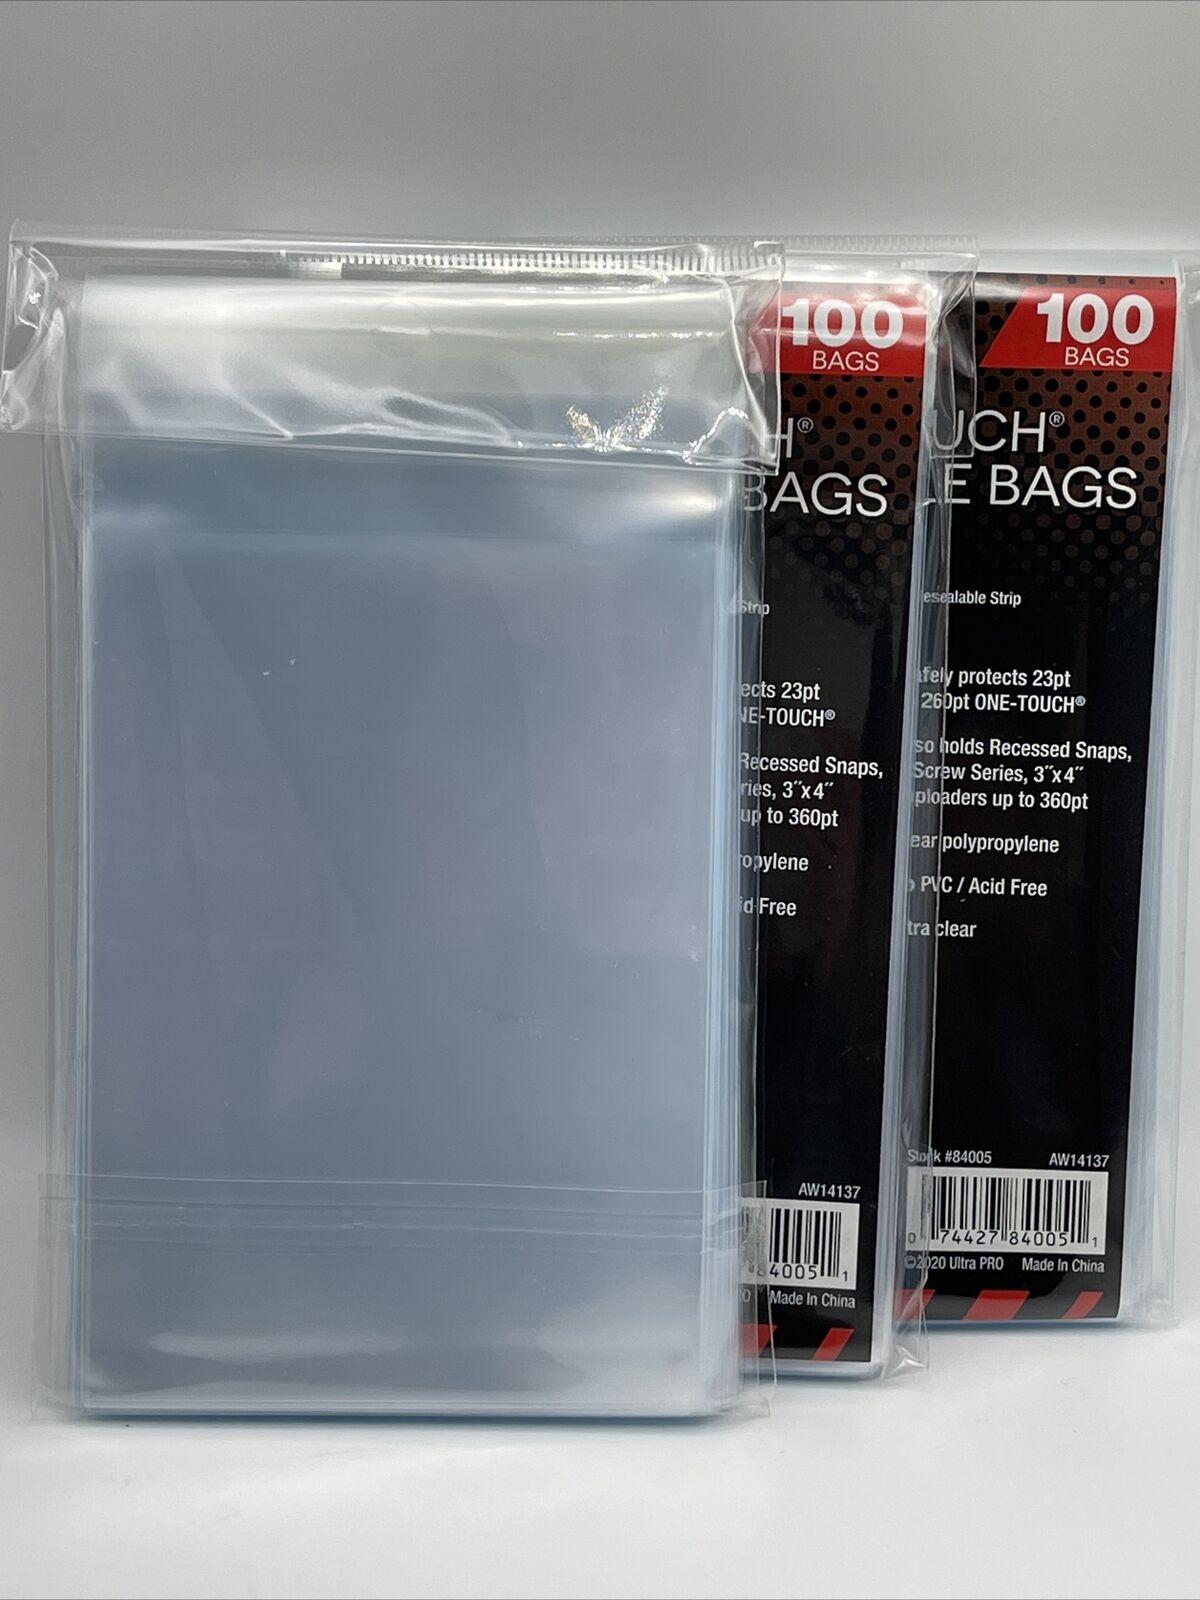 Ultra Pro One-Touch Resealable Bags 3 Packs of 100, 300 Total Bags